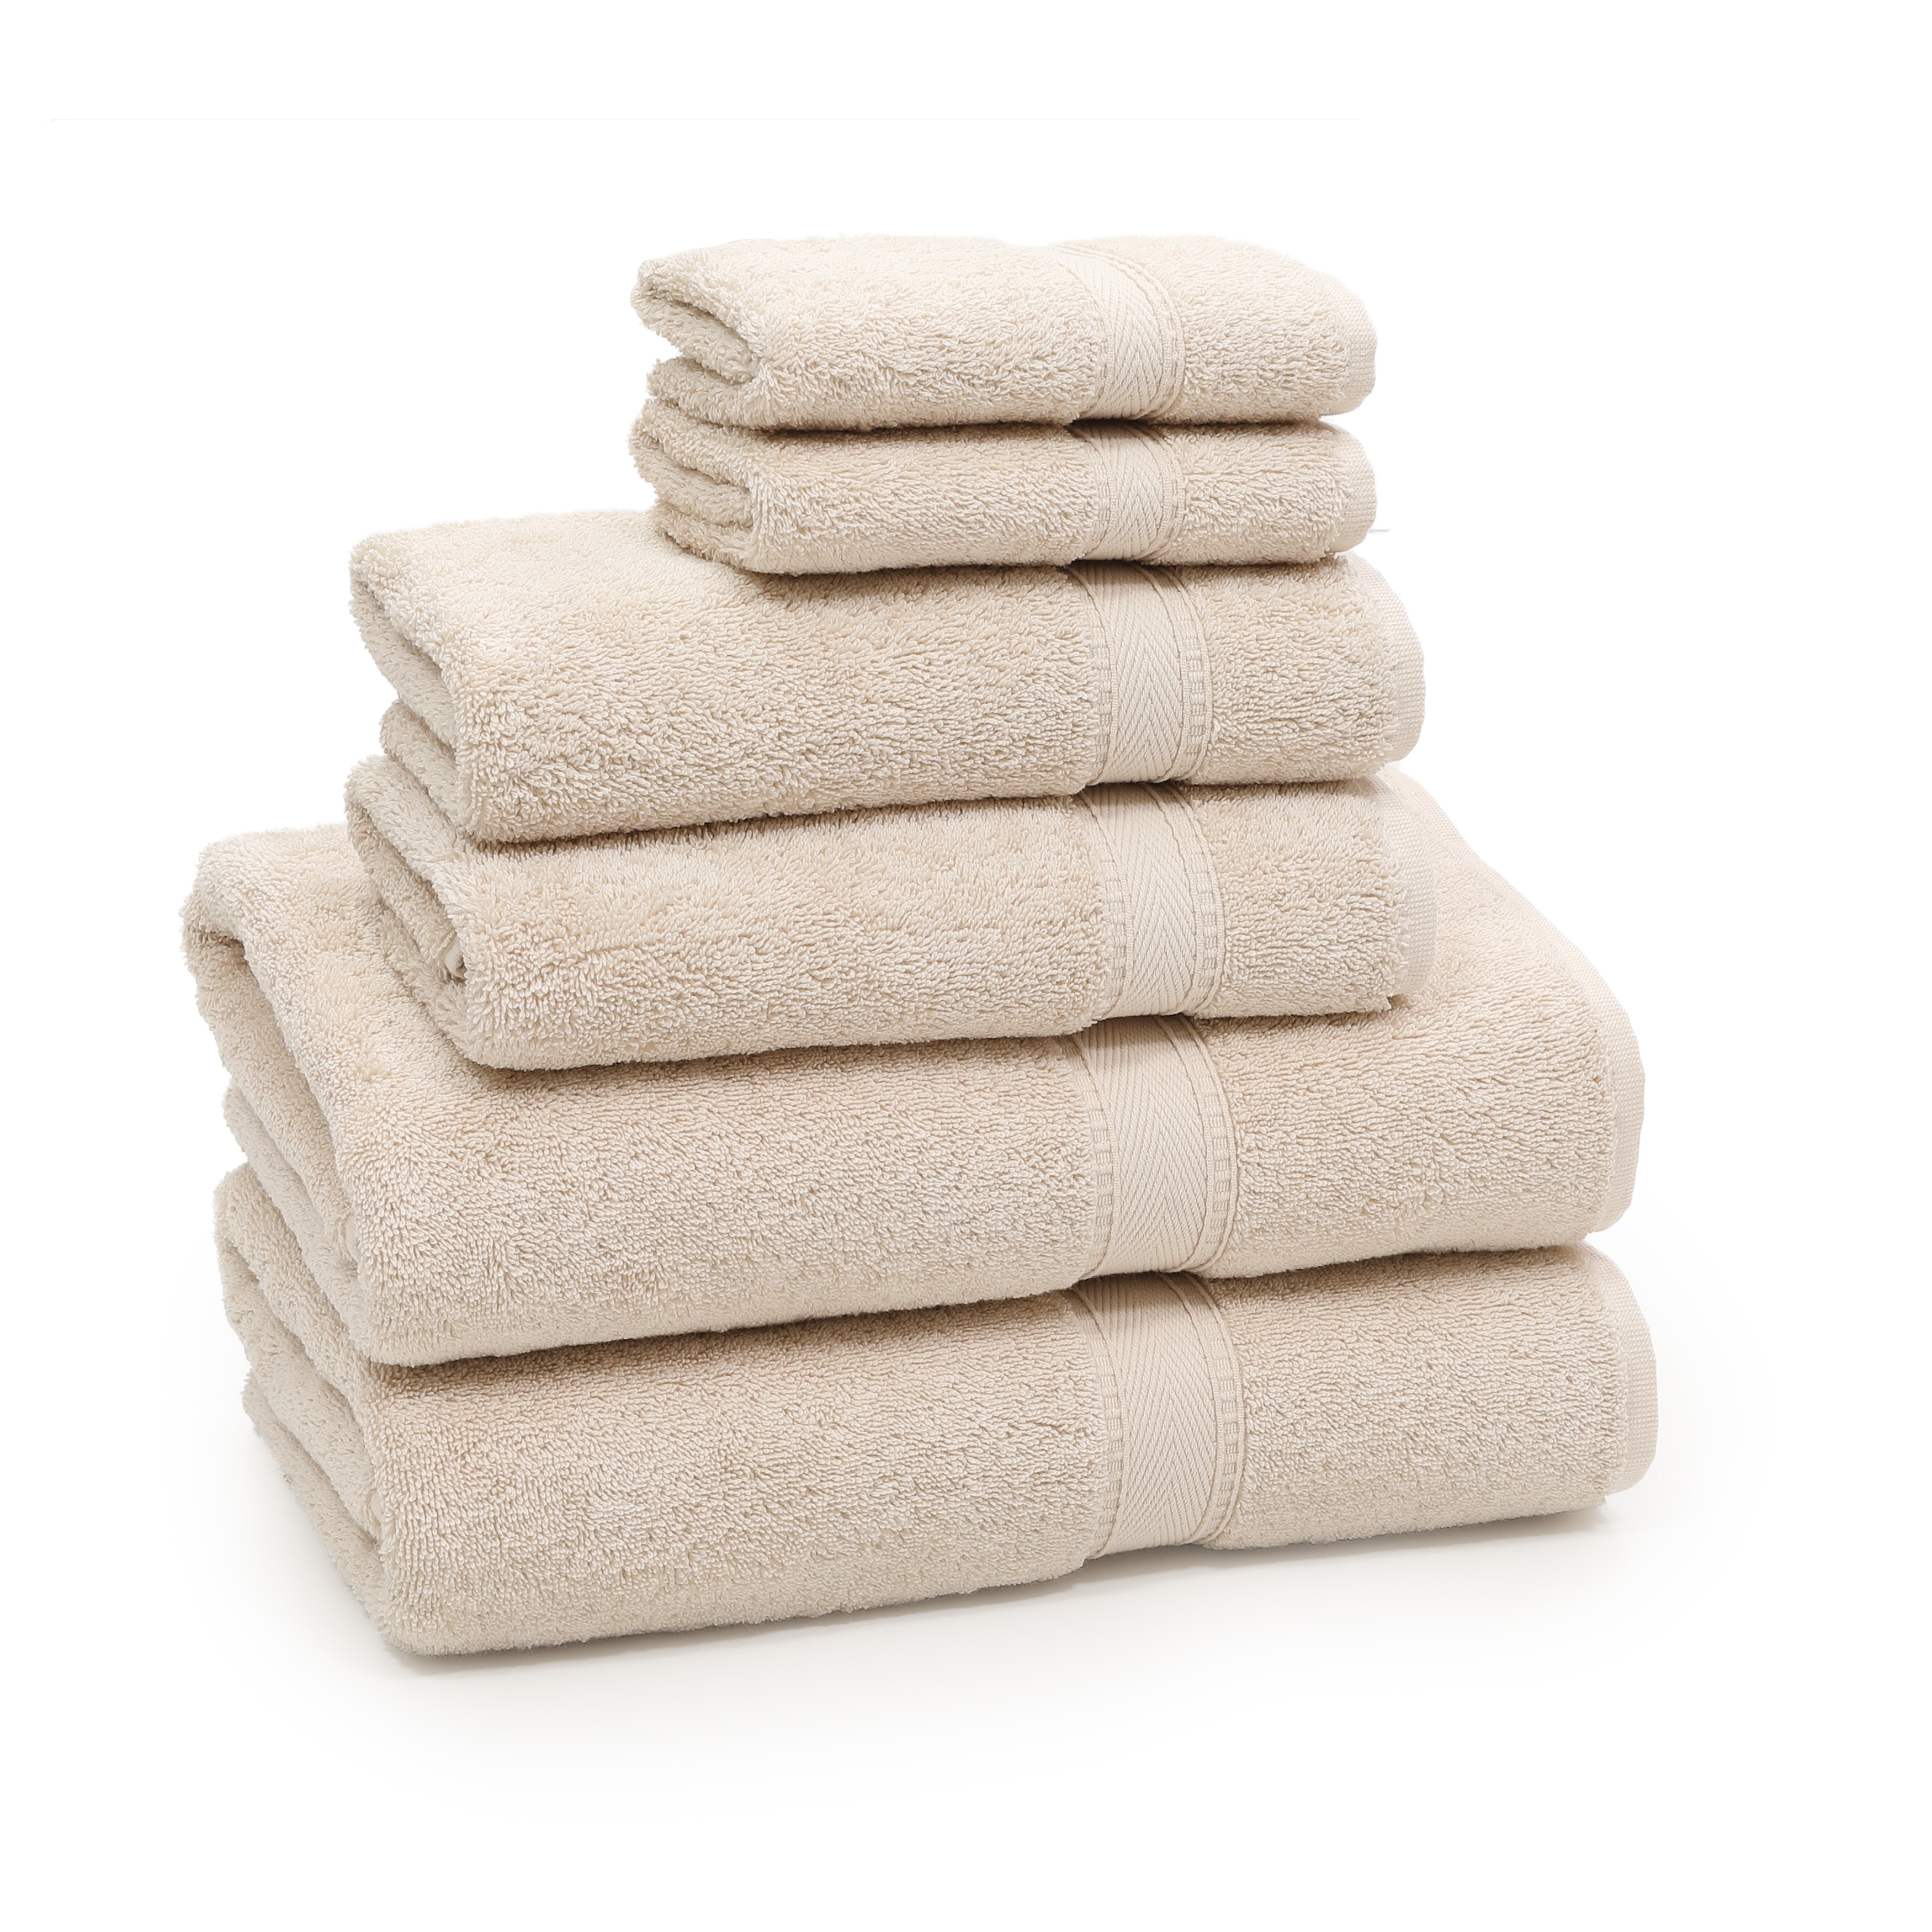 Hasen Hotel Luxury Bath Towel 6-Pack Set  100% Pure Cotton, Spa Quality  Absorbent, 1 - Fry's Food Stores